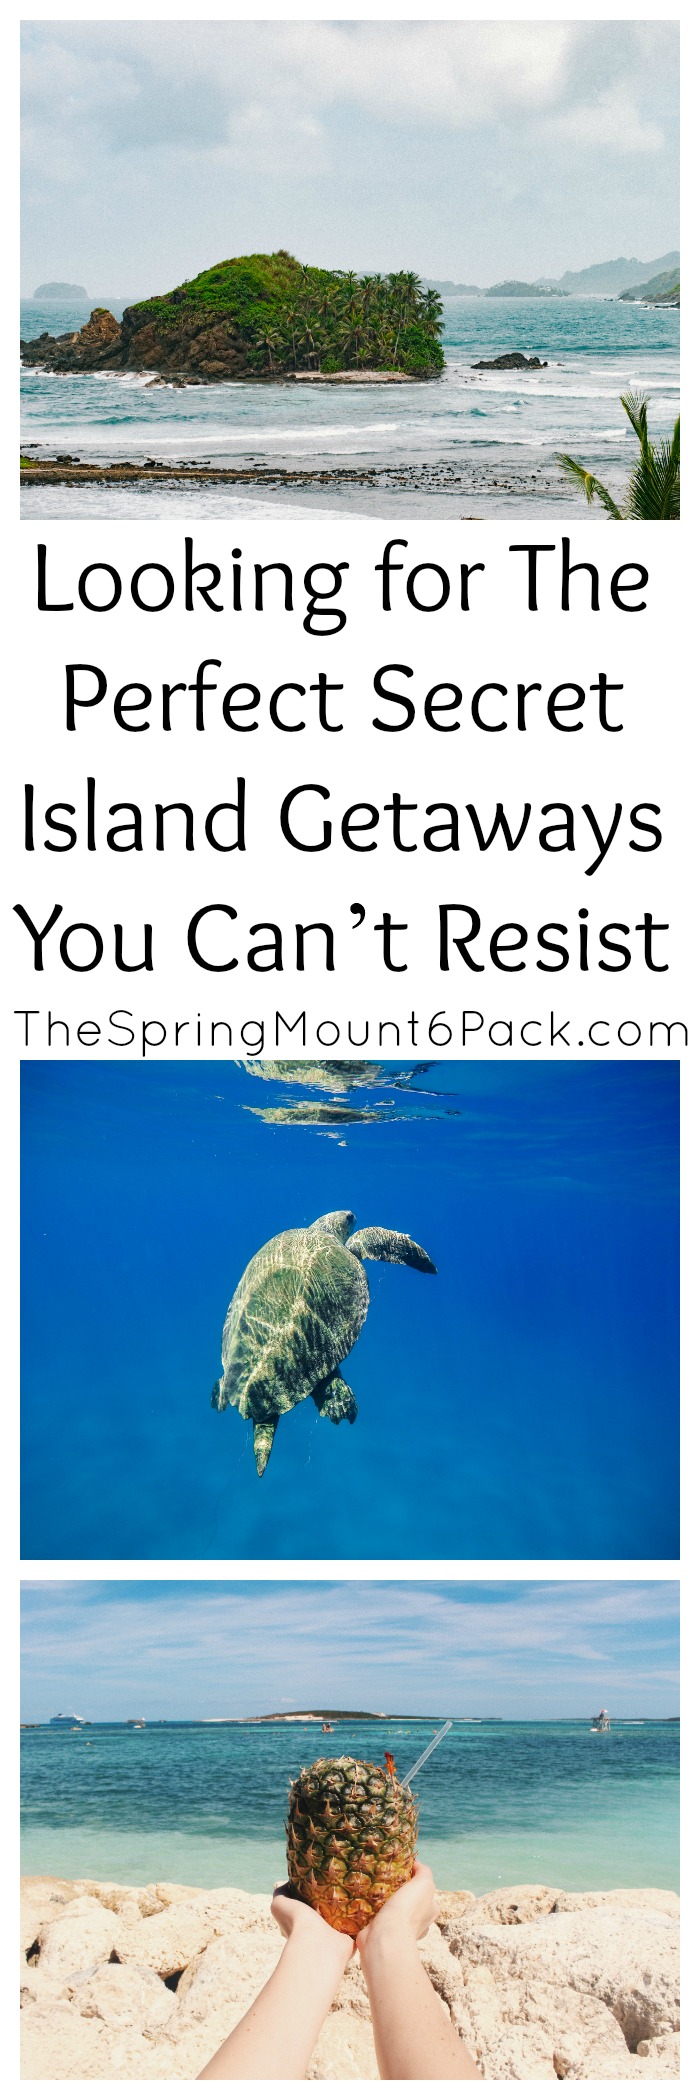 Looking for the perfect island getaway? Check out these Secret Island Getaways You Can’t Resist so you can start planning today. 